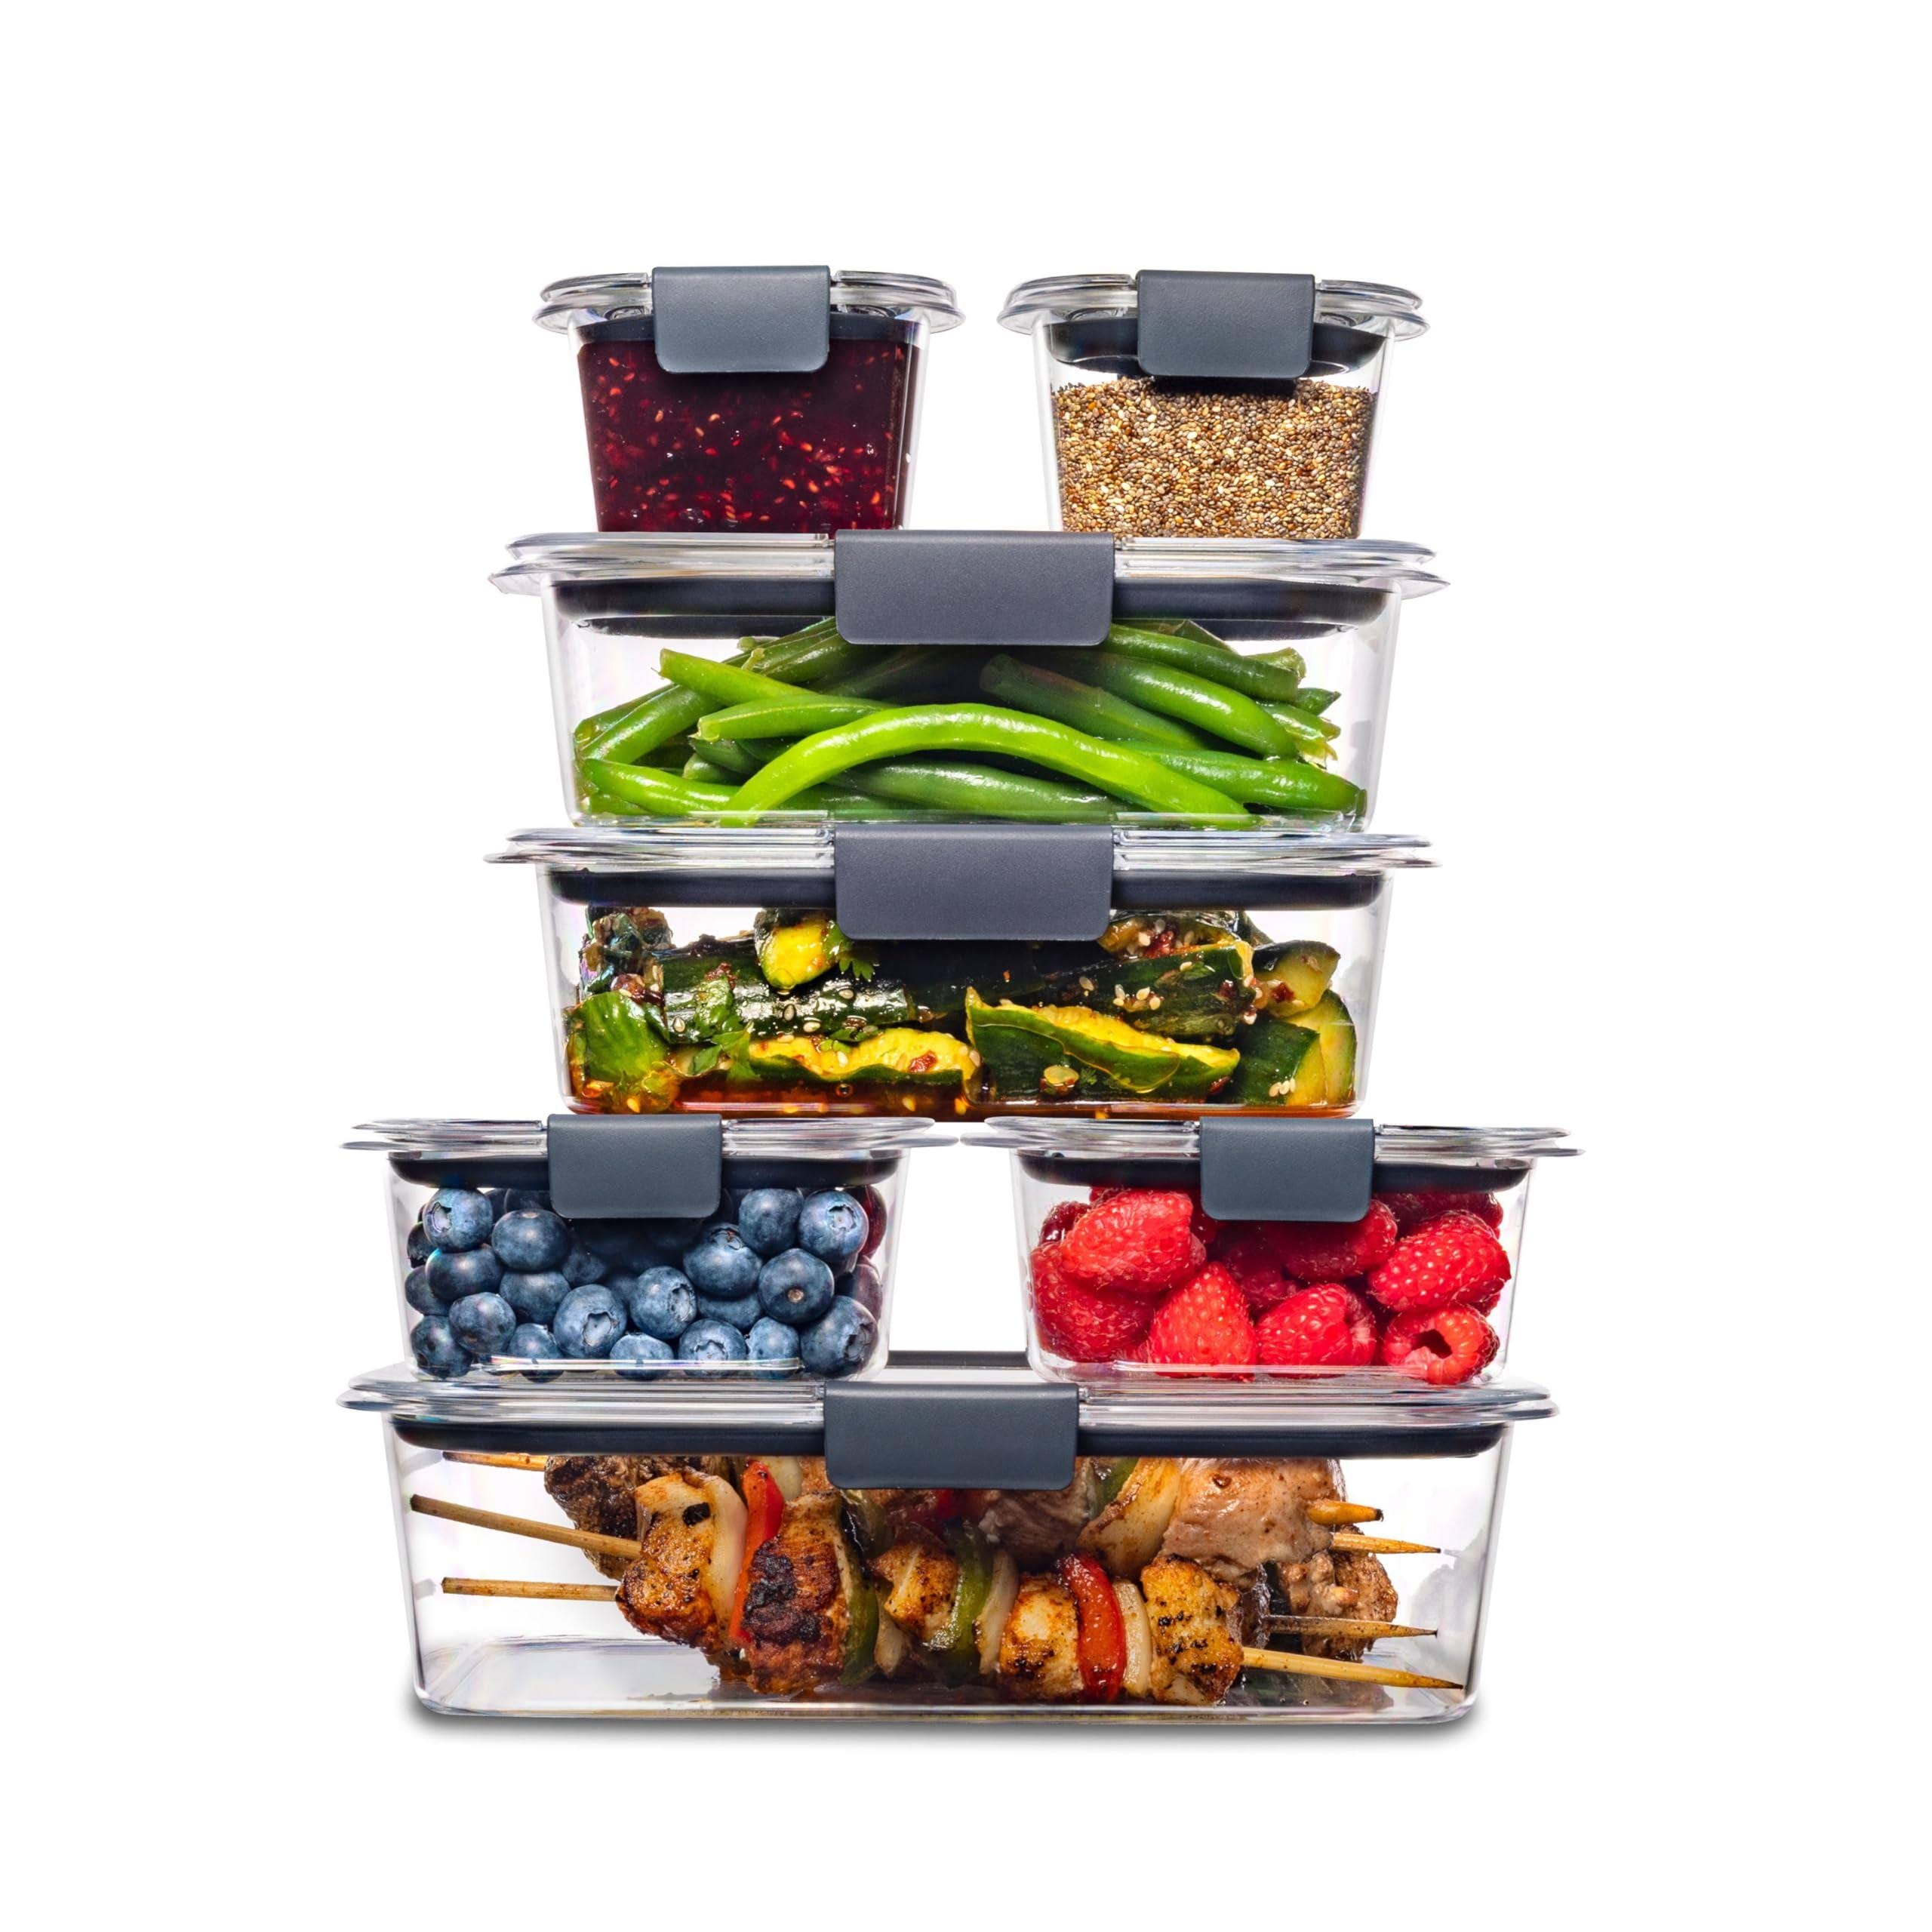 Rubbermaid Brilliance Airtight Food Storage Containers: Sleek & Durable BPA-Free Plastic Lids | Image